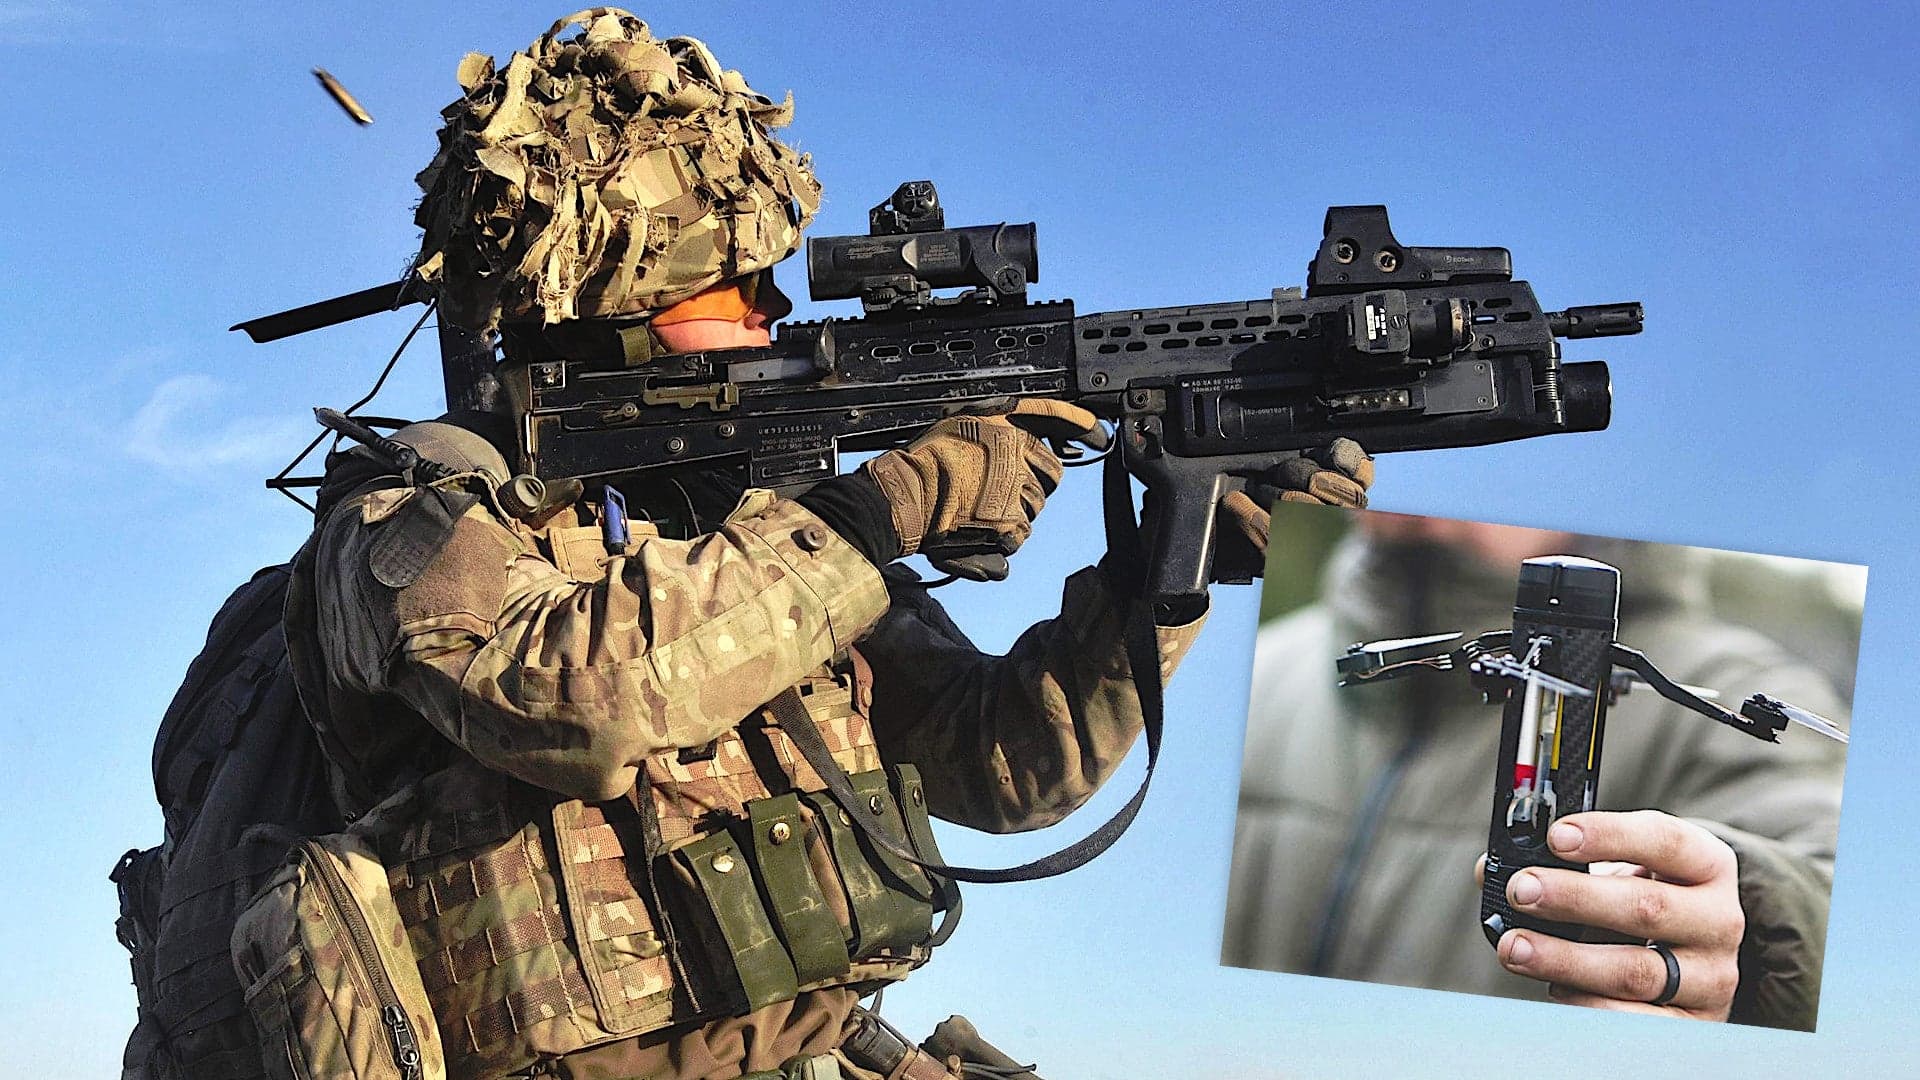 British Troops Get Small Swarming Drones They Can Fire From 40mm Grenade Launchers